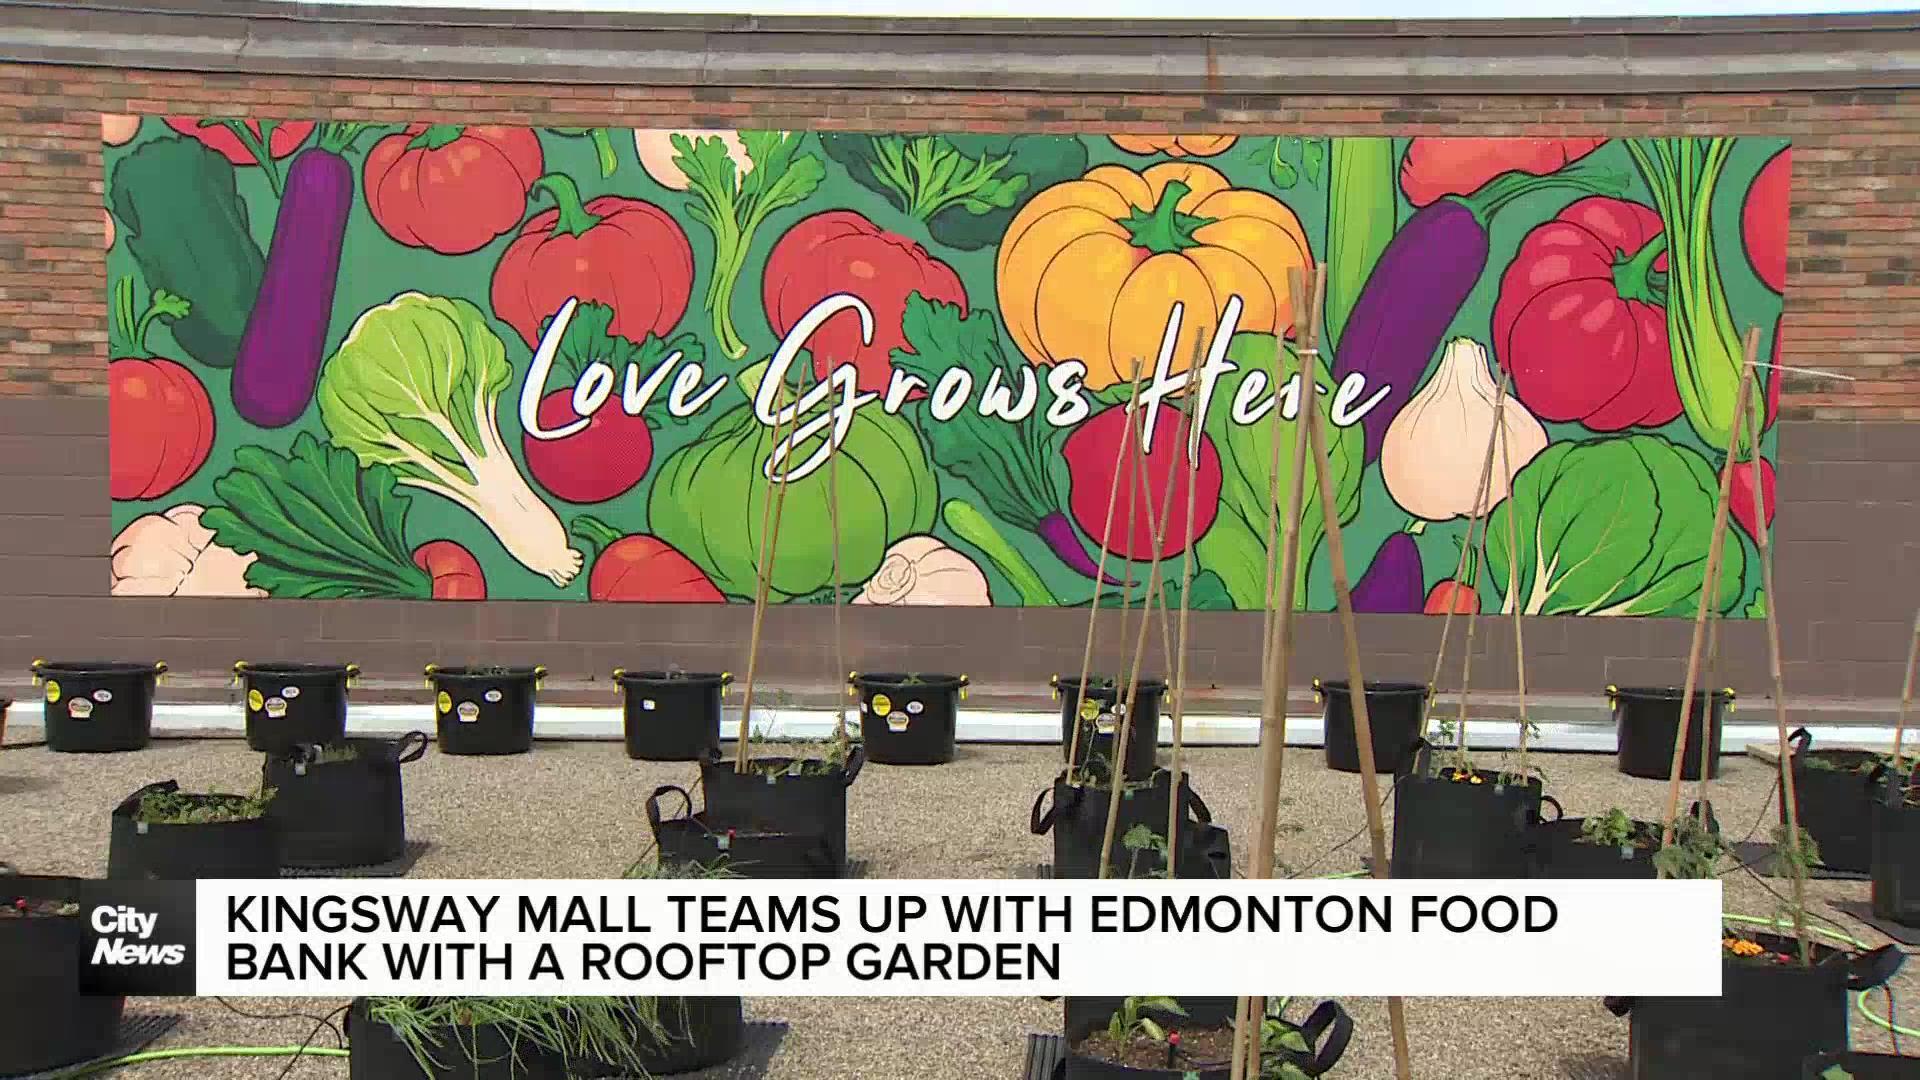 Kingsway Mall and Edmonton Food Bank team up with rooftop garden